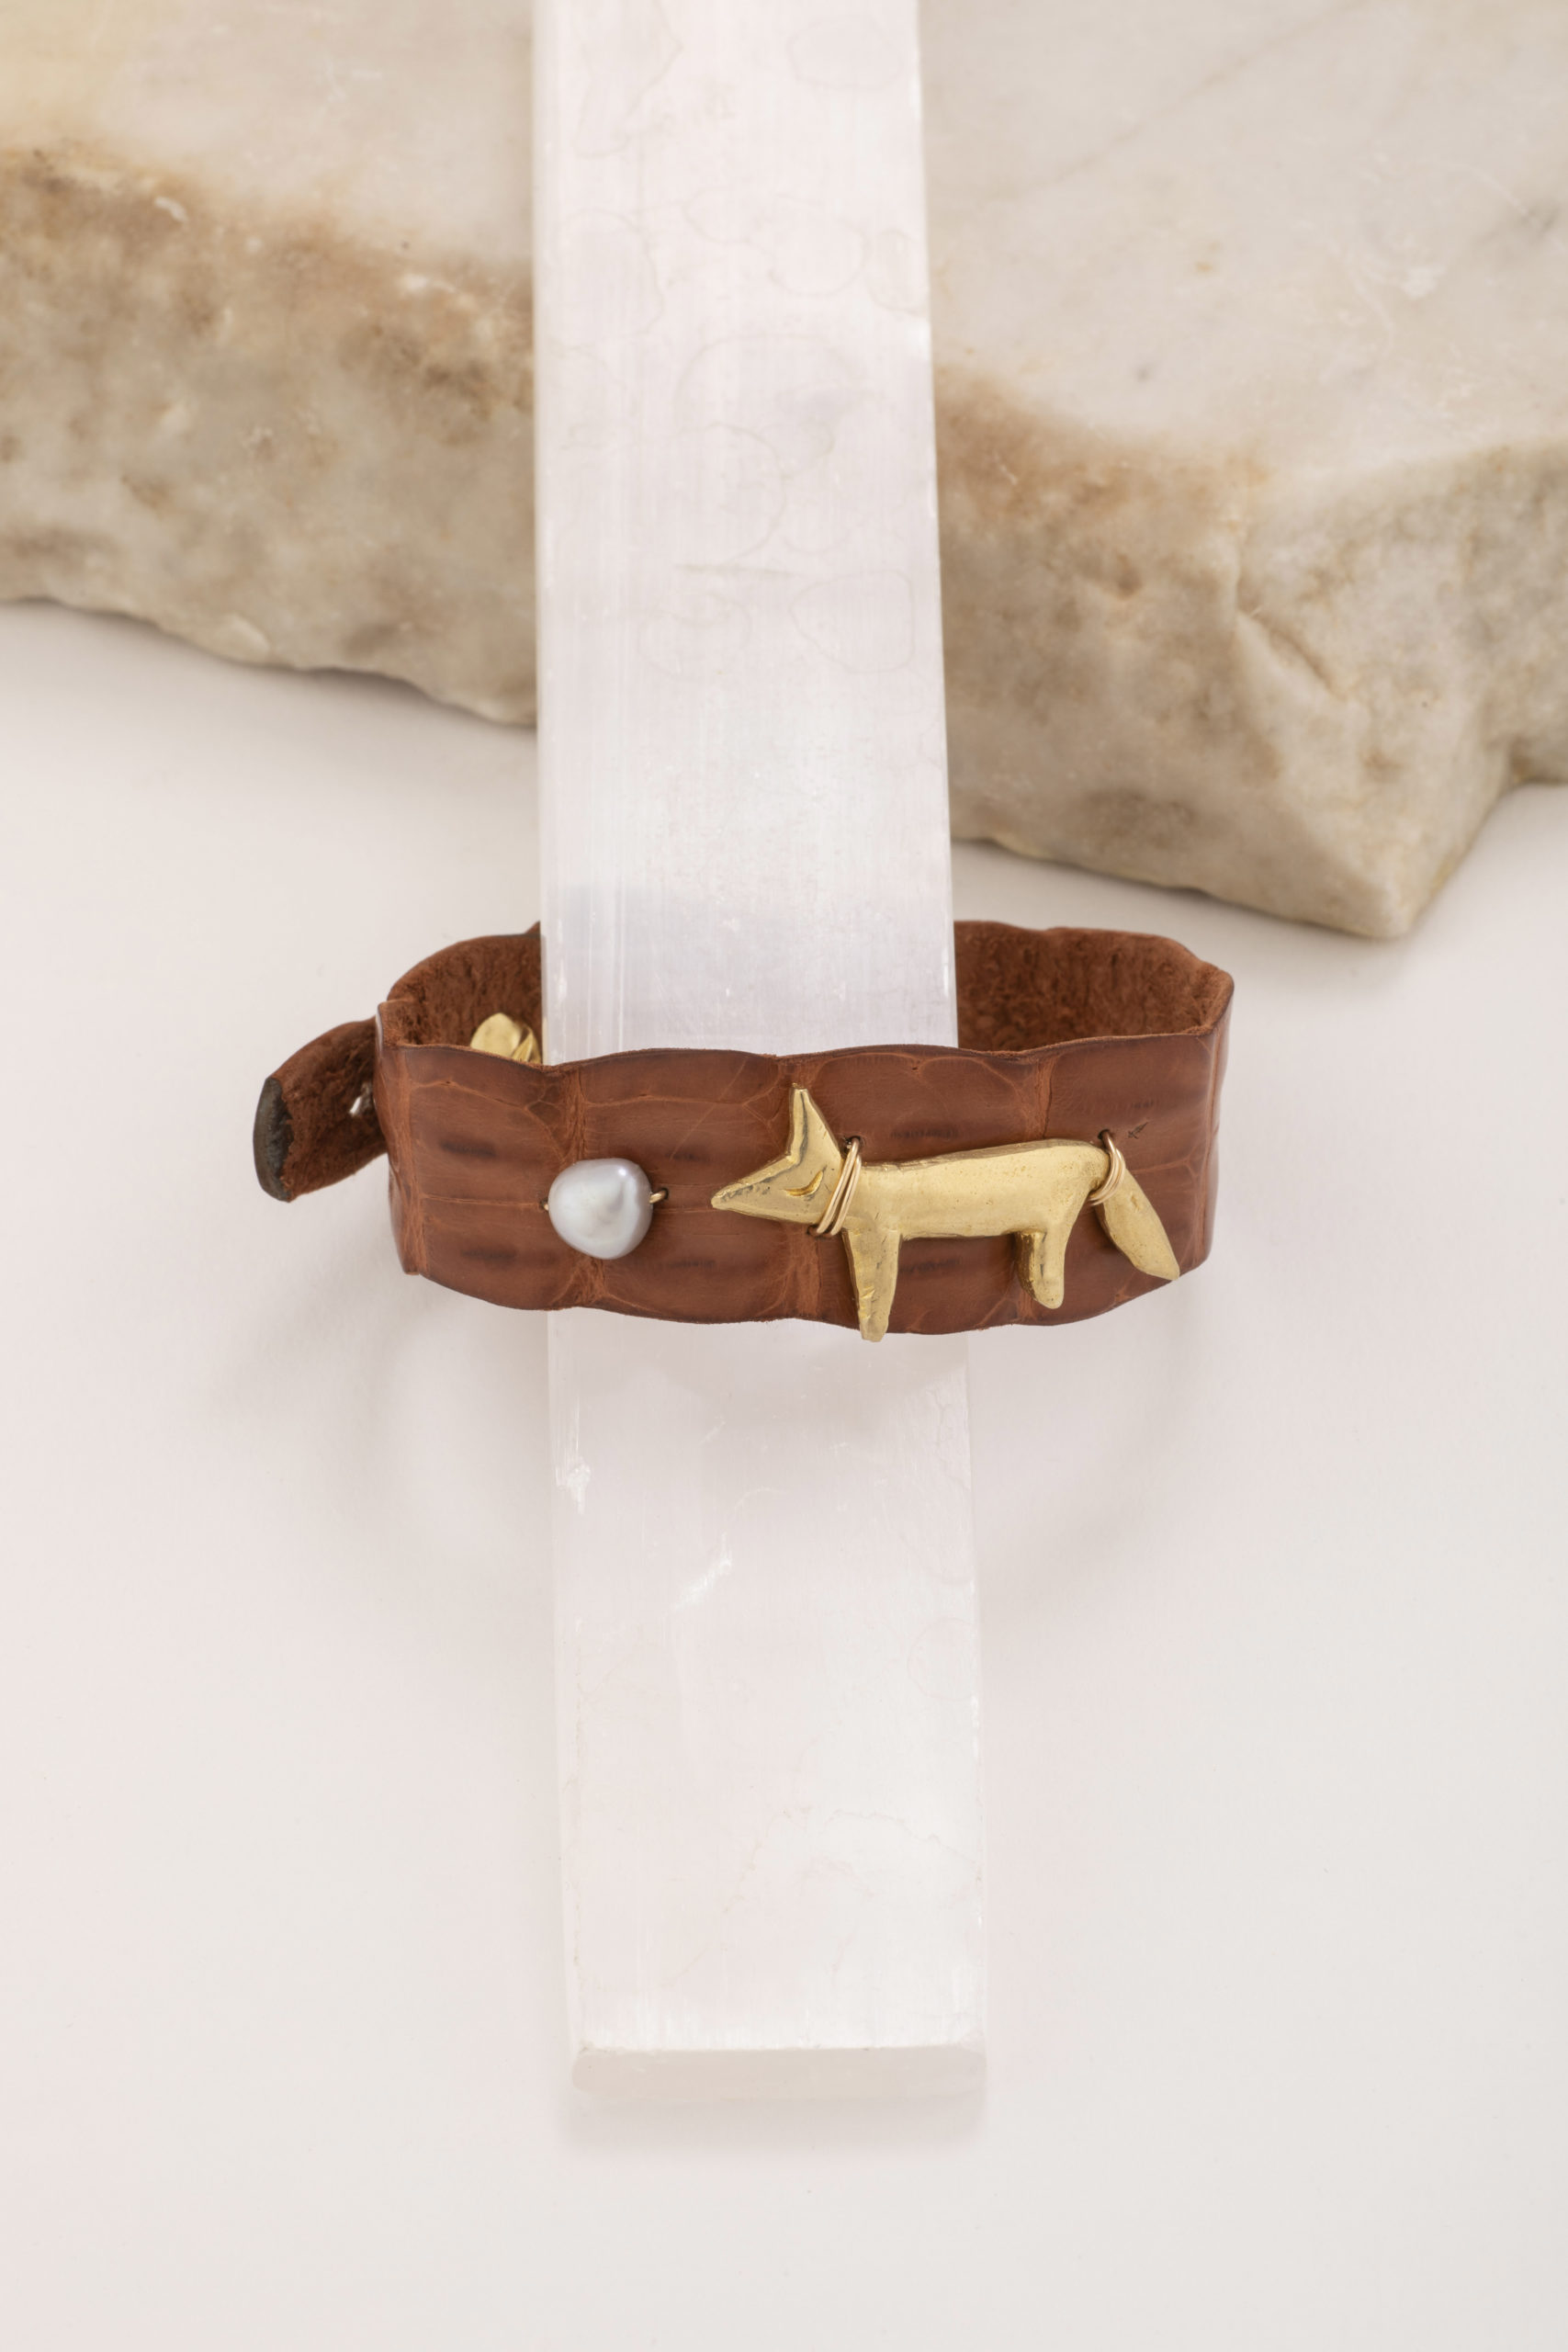 Featured image for “Gallant Leather Bracelet”